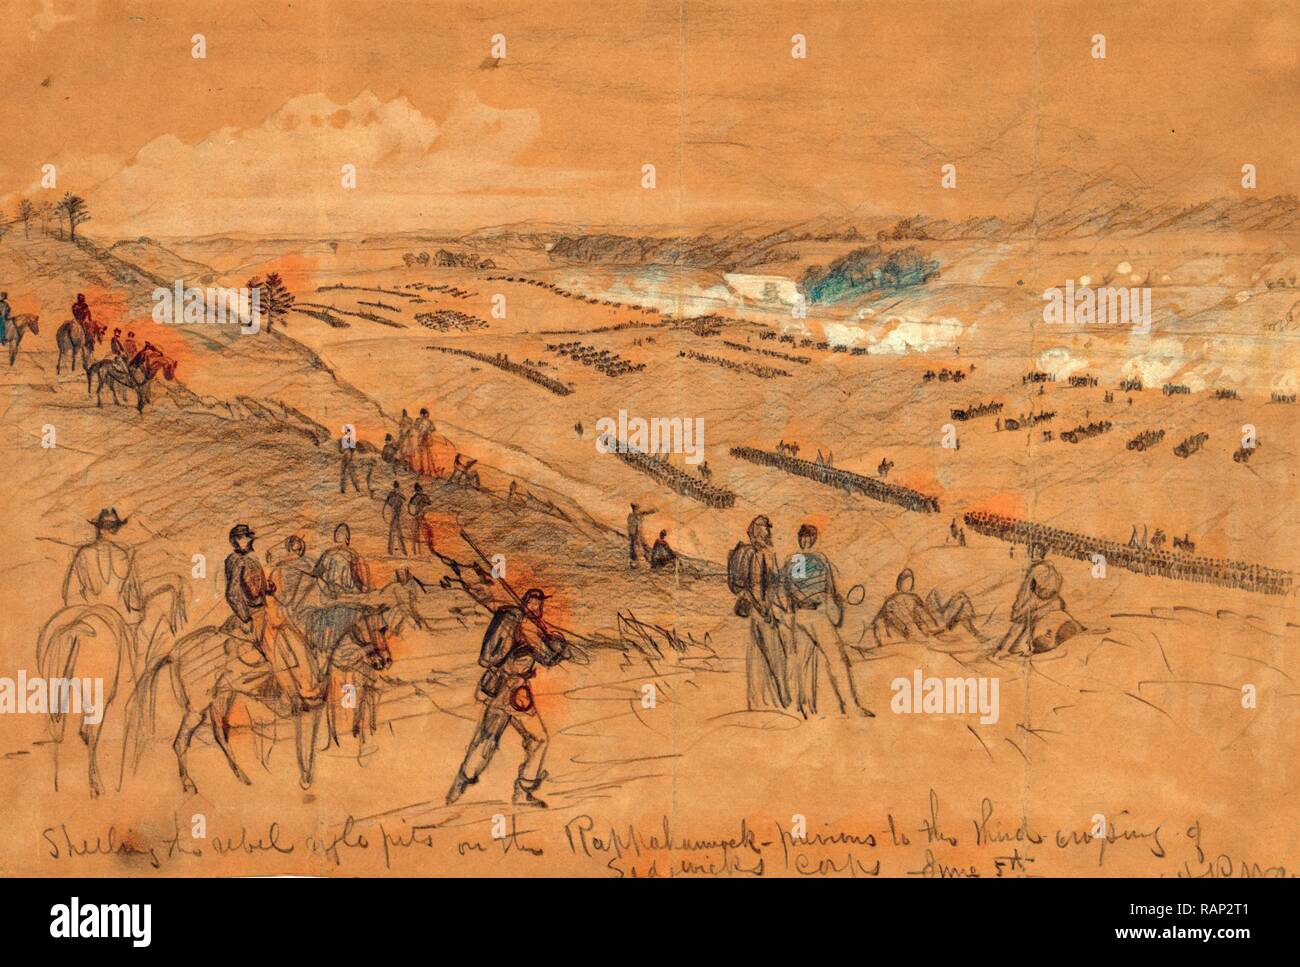 Shelling the rebel rifle pits on the Rappahannock, previous to the third crossing of Sedgwicks corps June 5th, 1863 reimagined Stock Photo